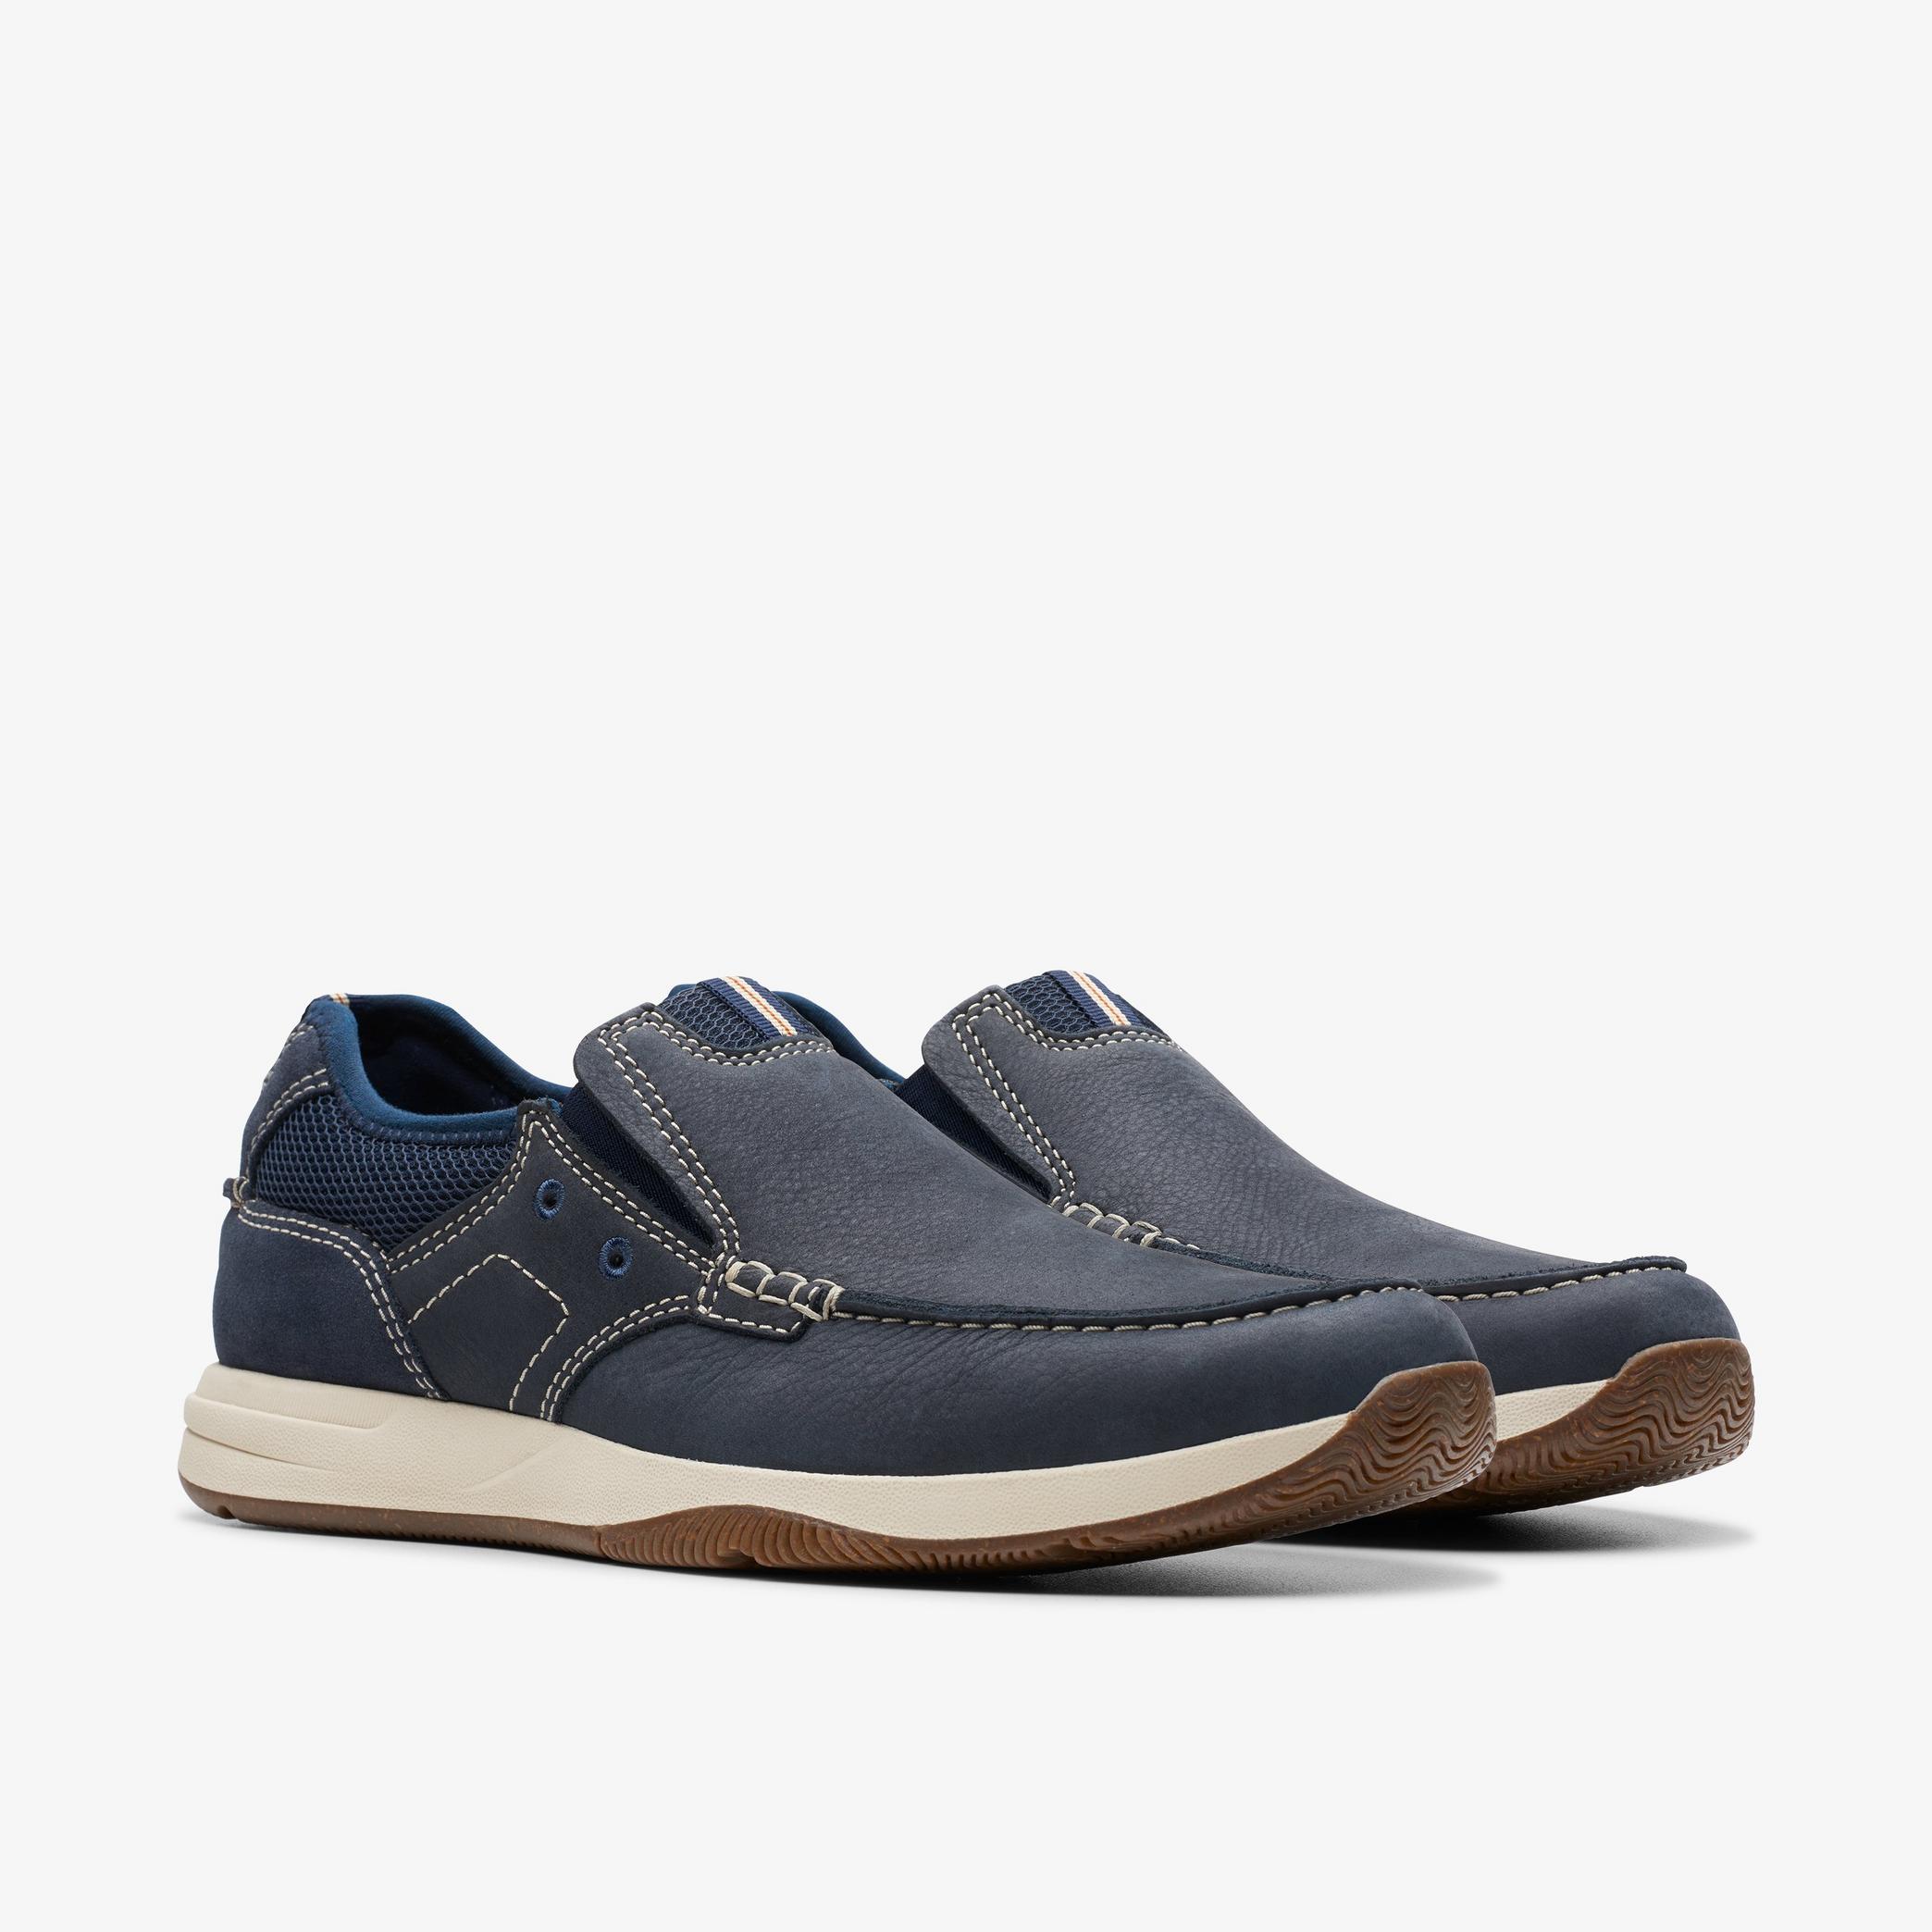 Sailview Step Navy Nubuck Boat Shoes, view 4 of 6